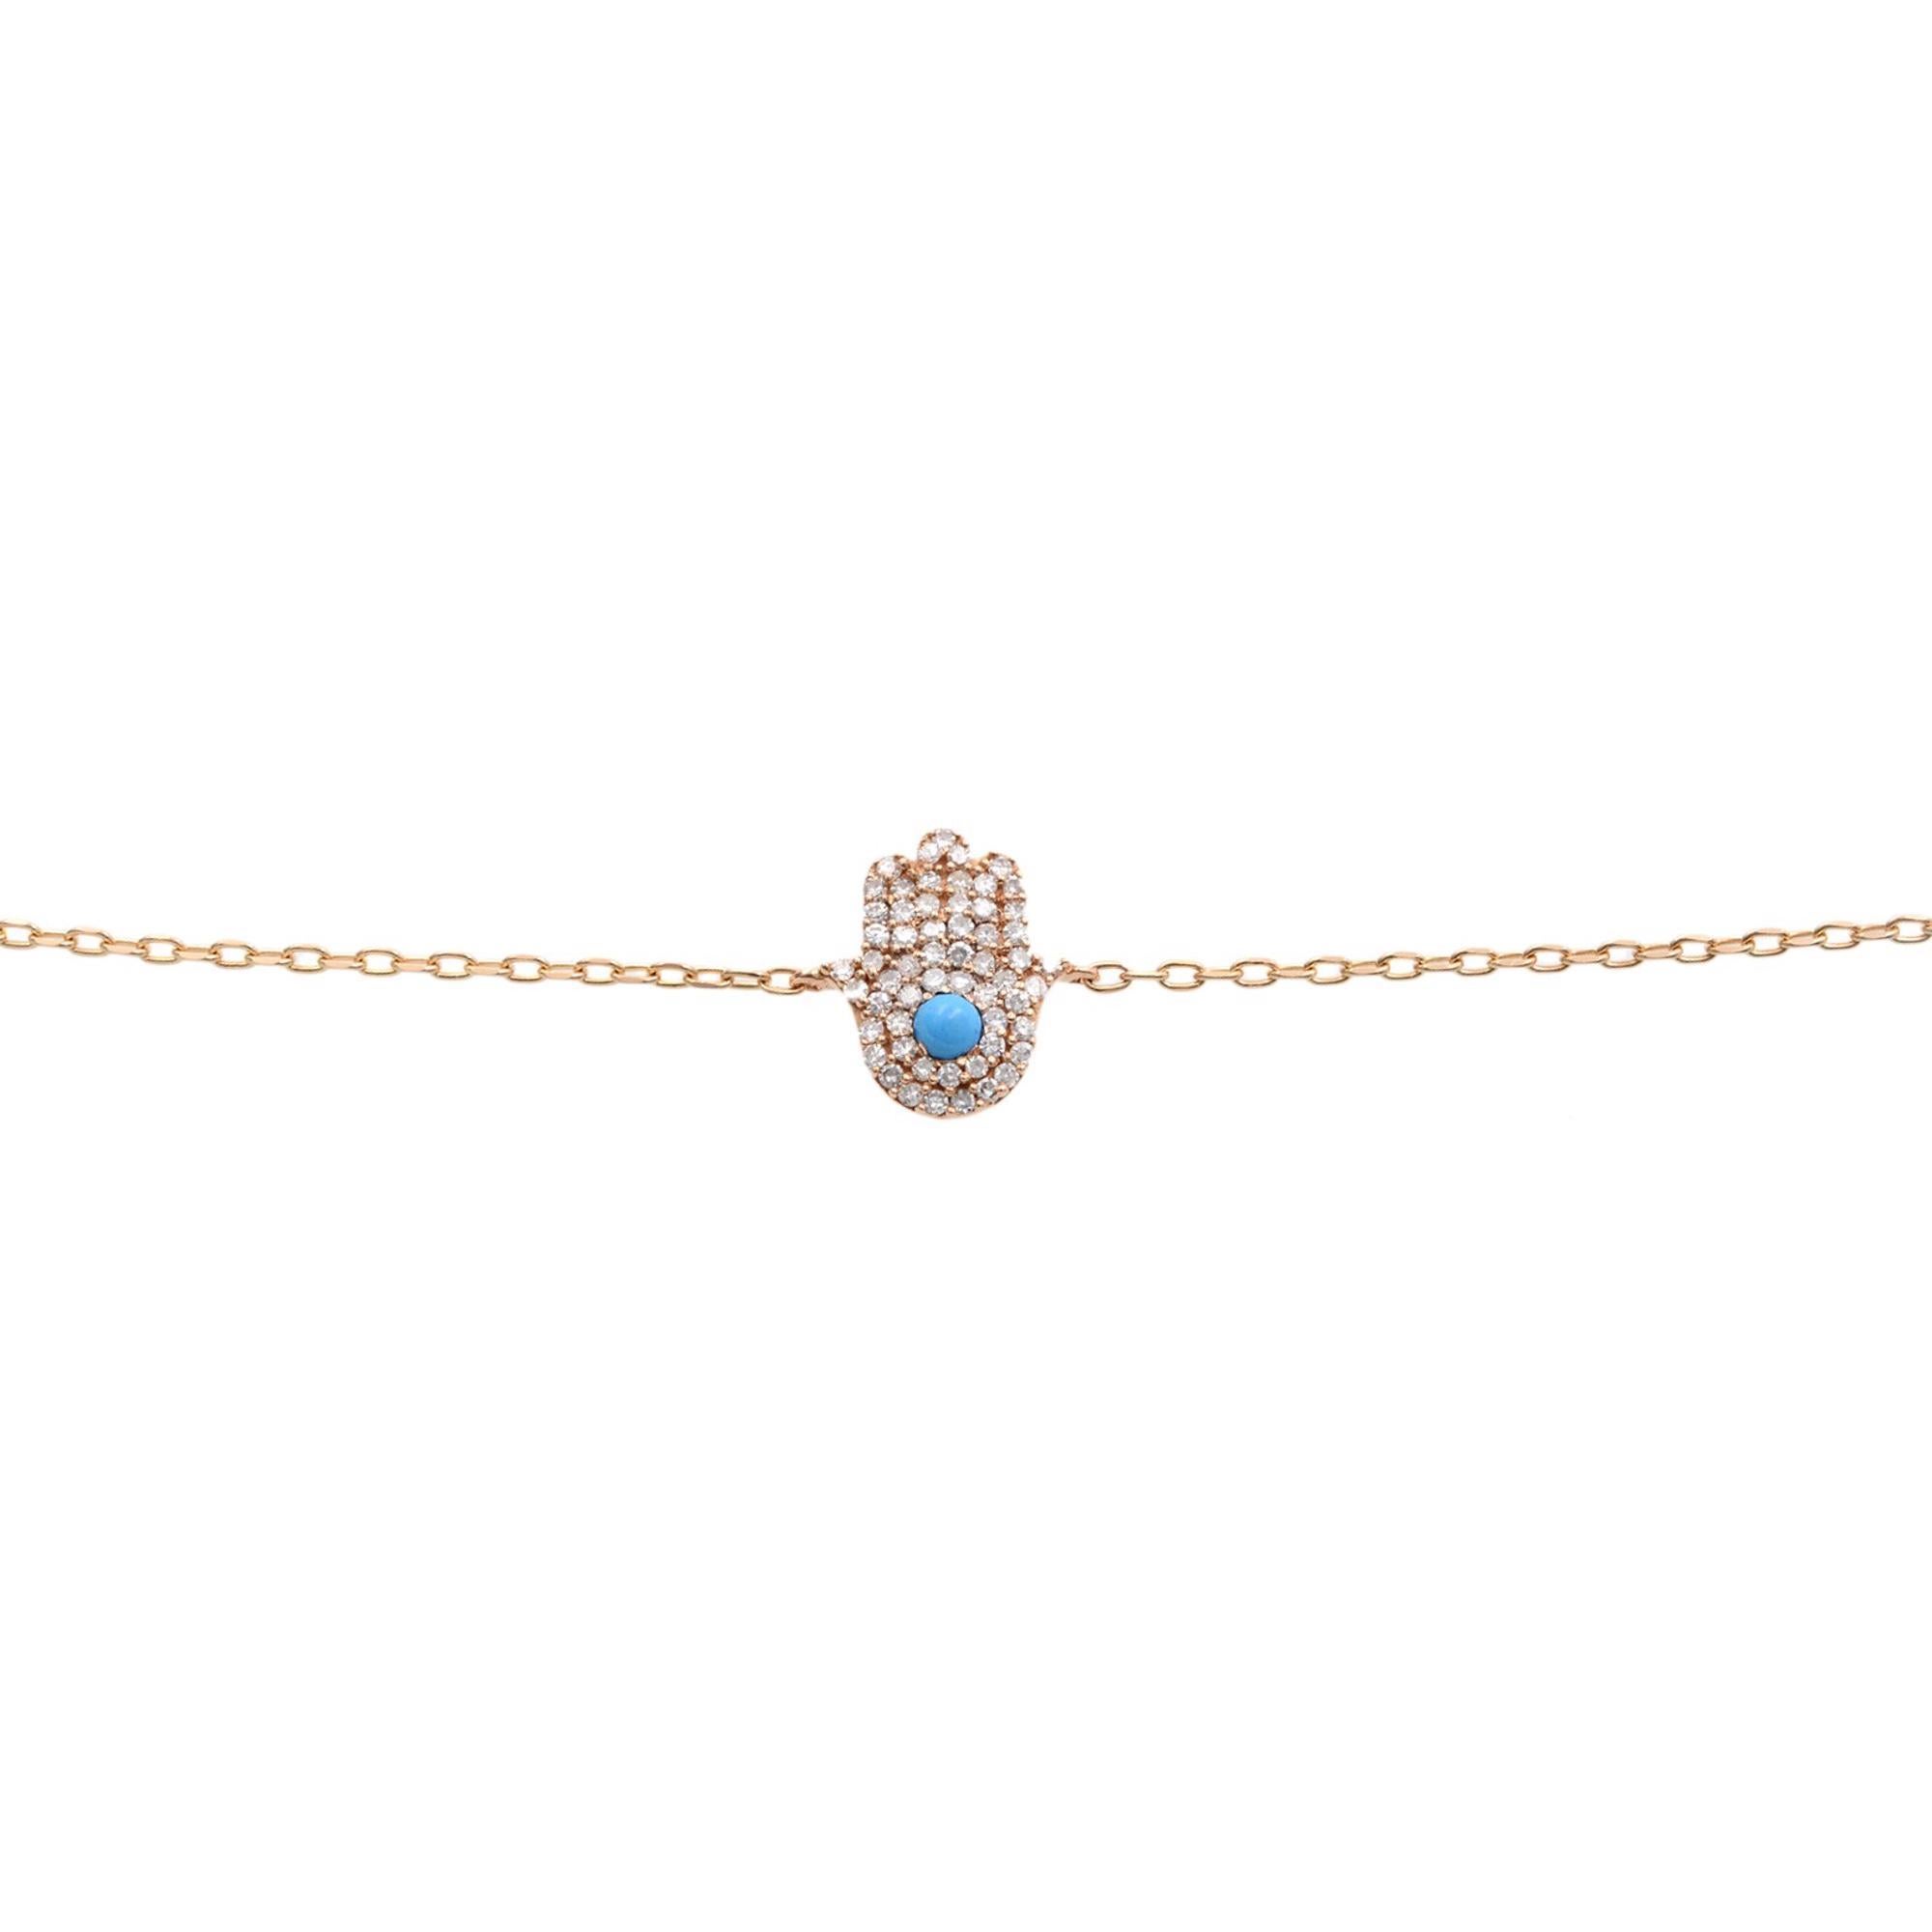 Classic and timeless hamsa bracelet, crafted in 14k rose gold comes with center stone turquoise surrounded by round cut pave set white diamonds weighing 0.15cttw, anchored with delicate 7.5 inches 14k rose gold chain. This bracelet is available in